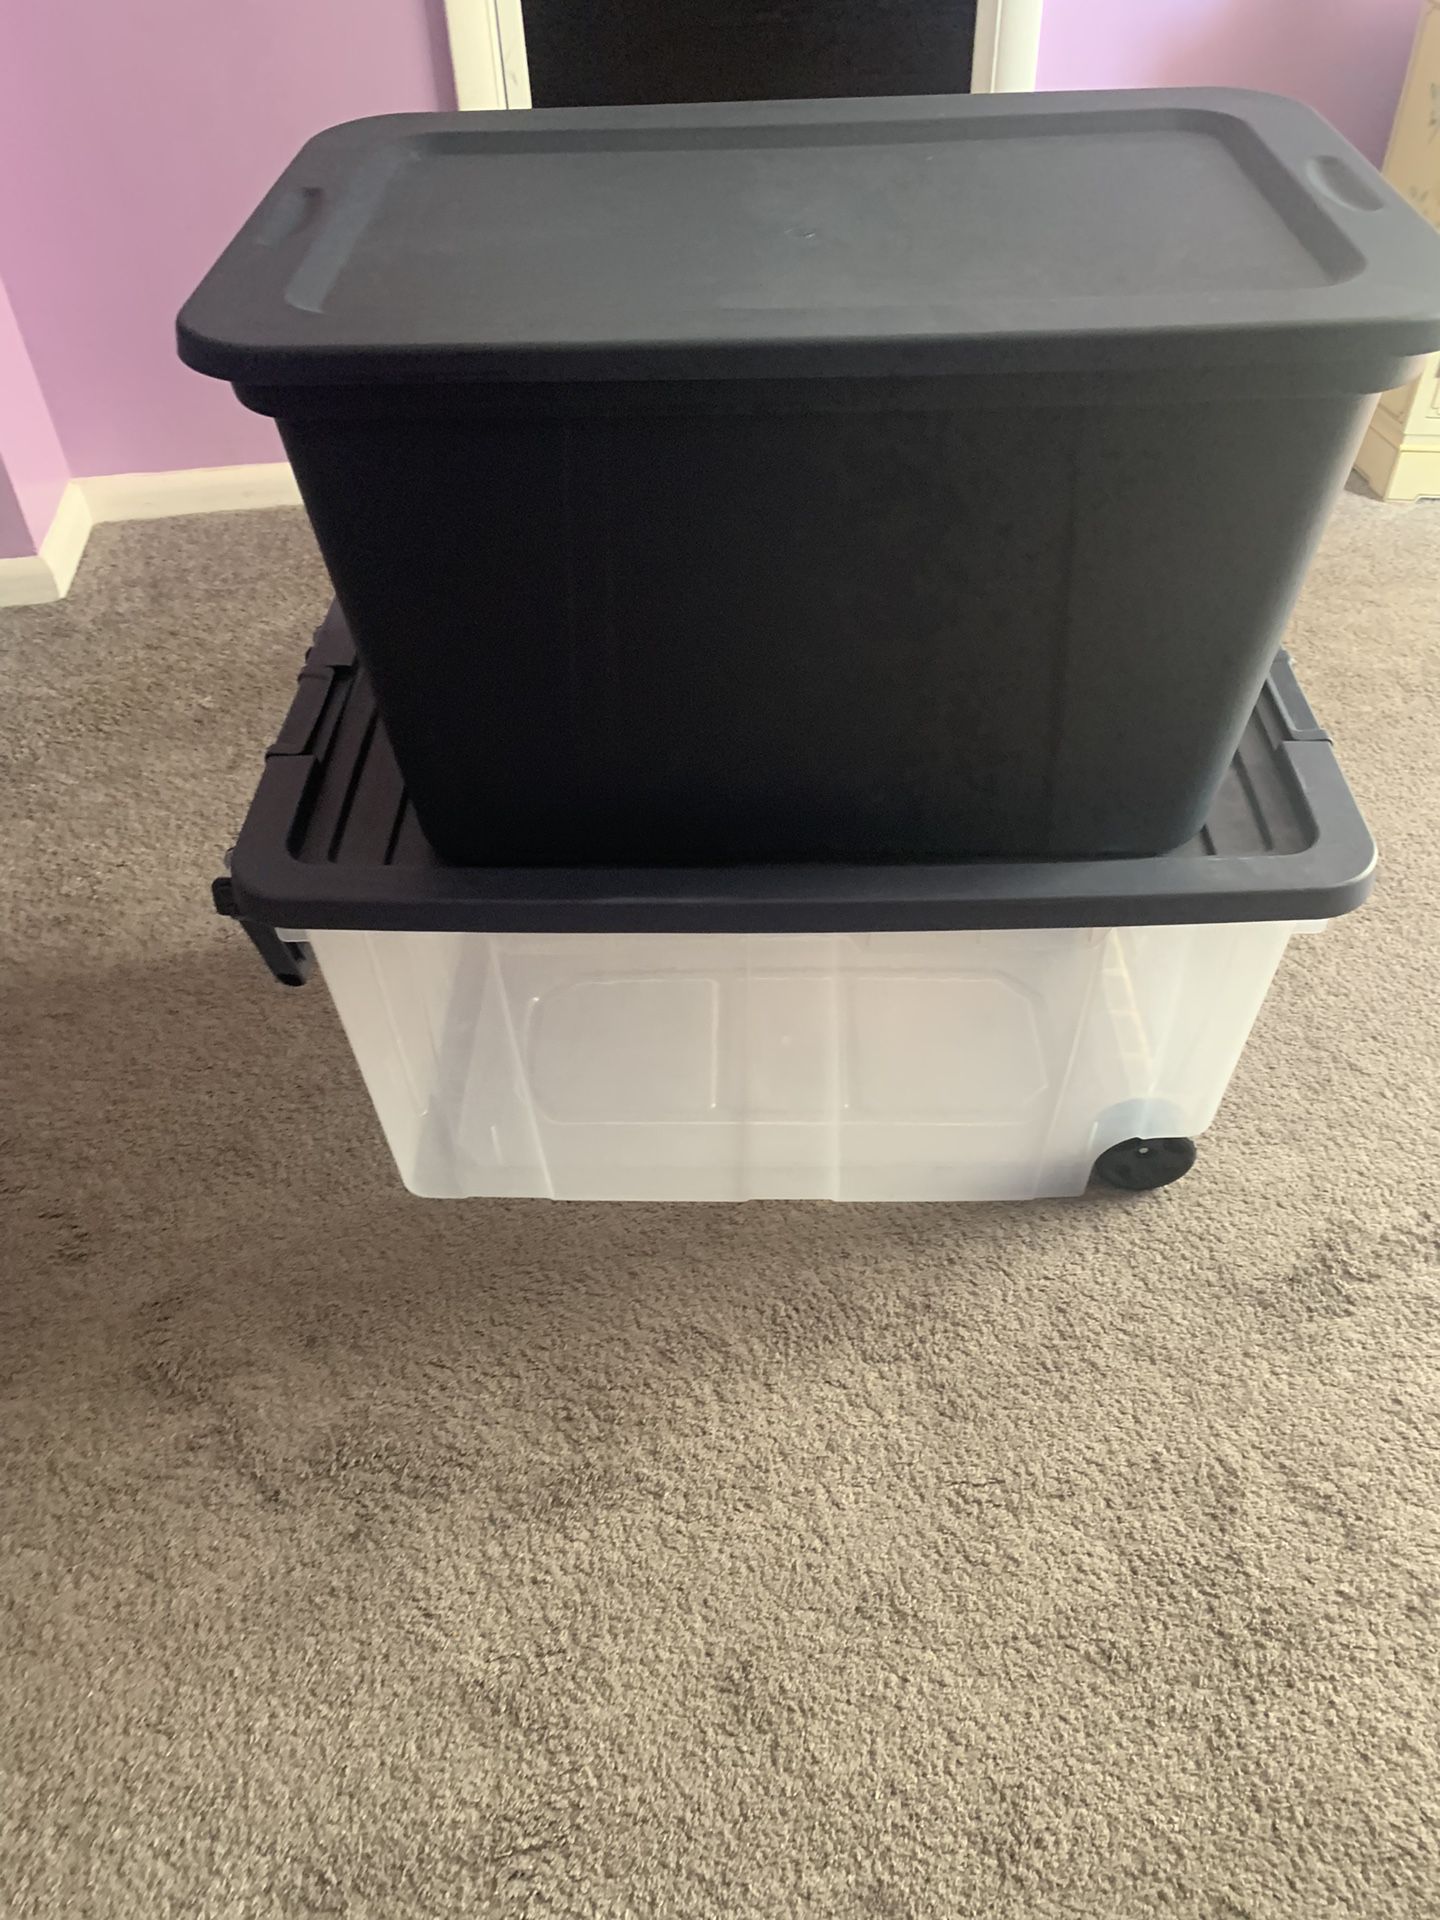 2 large Containers